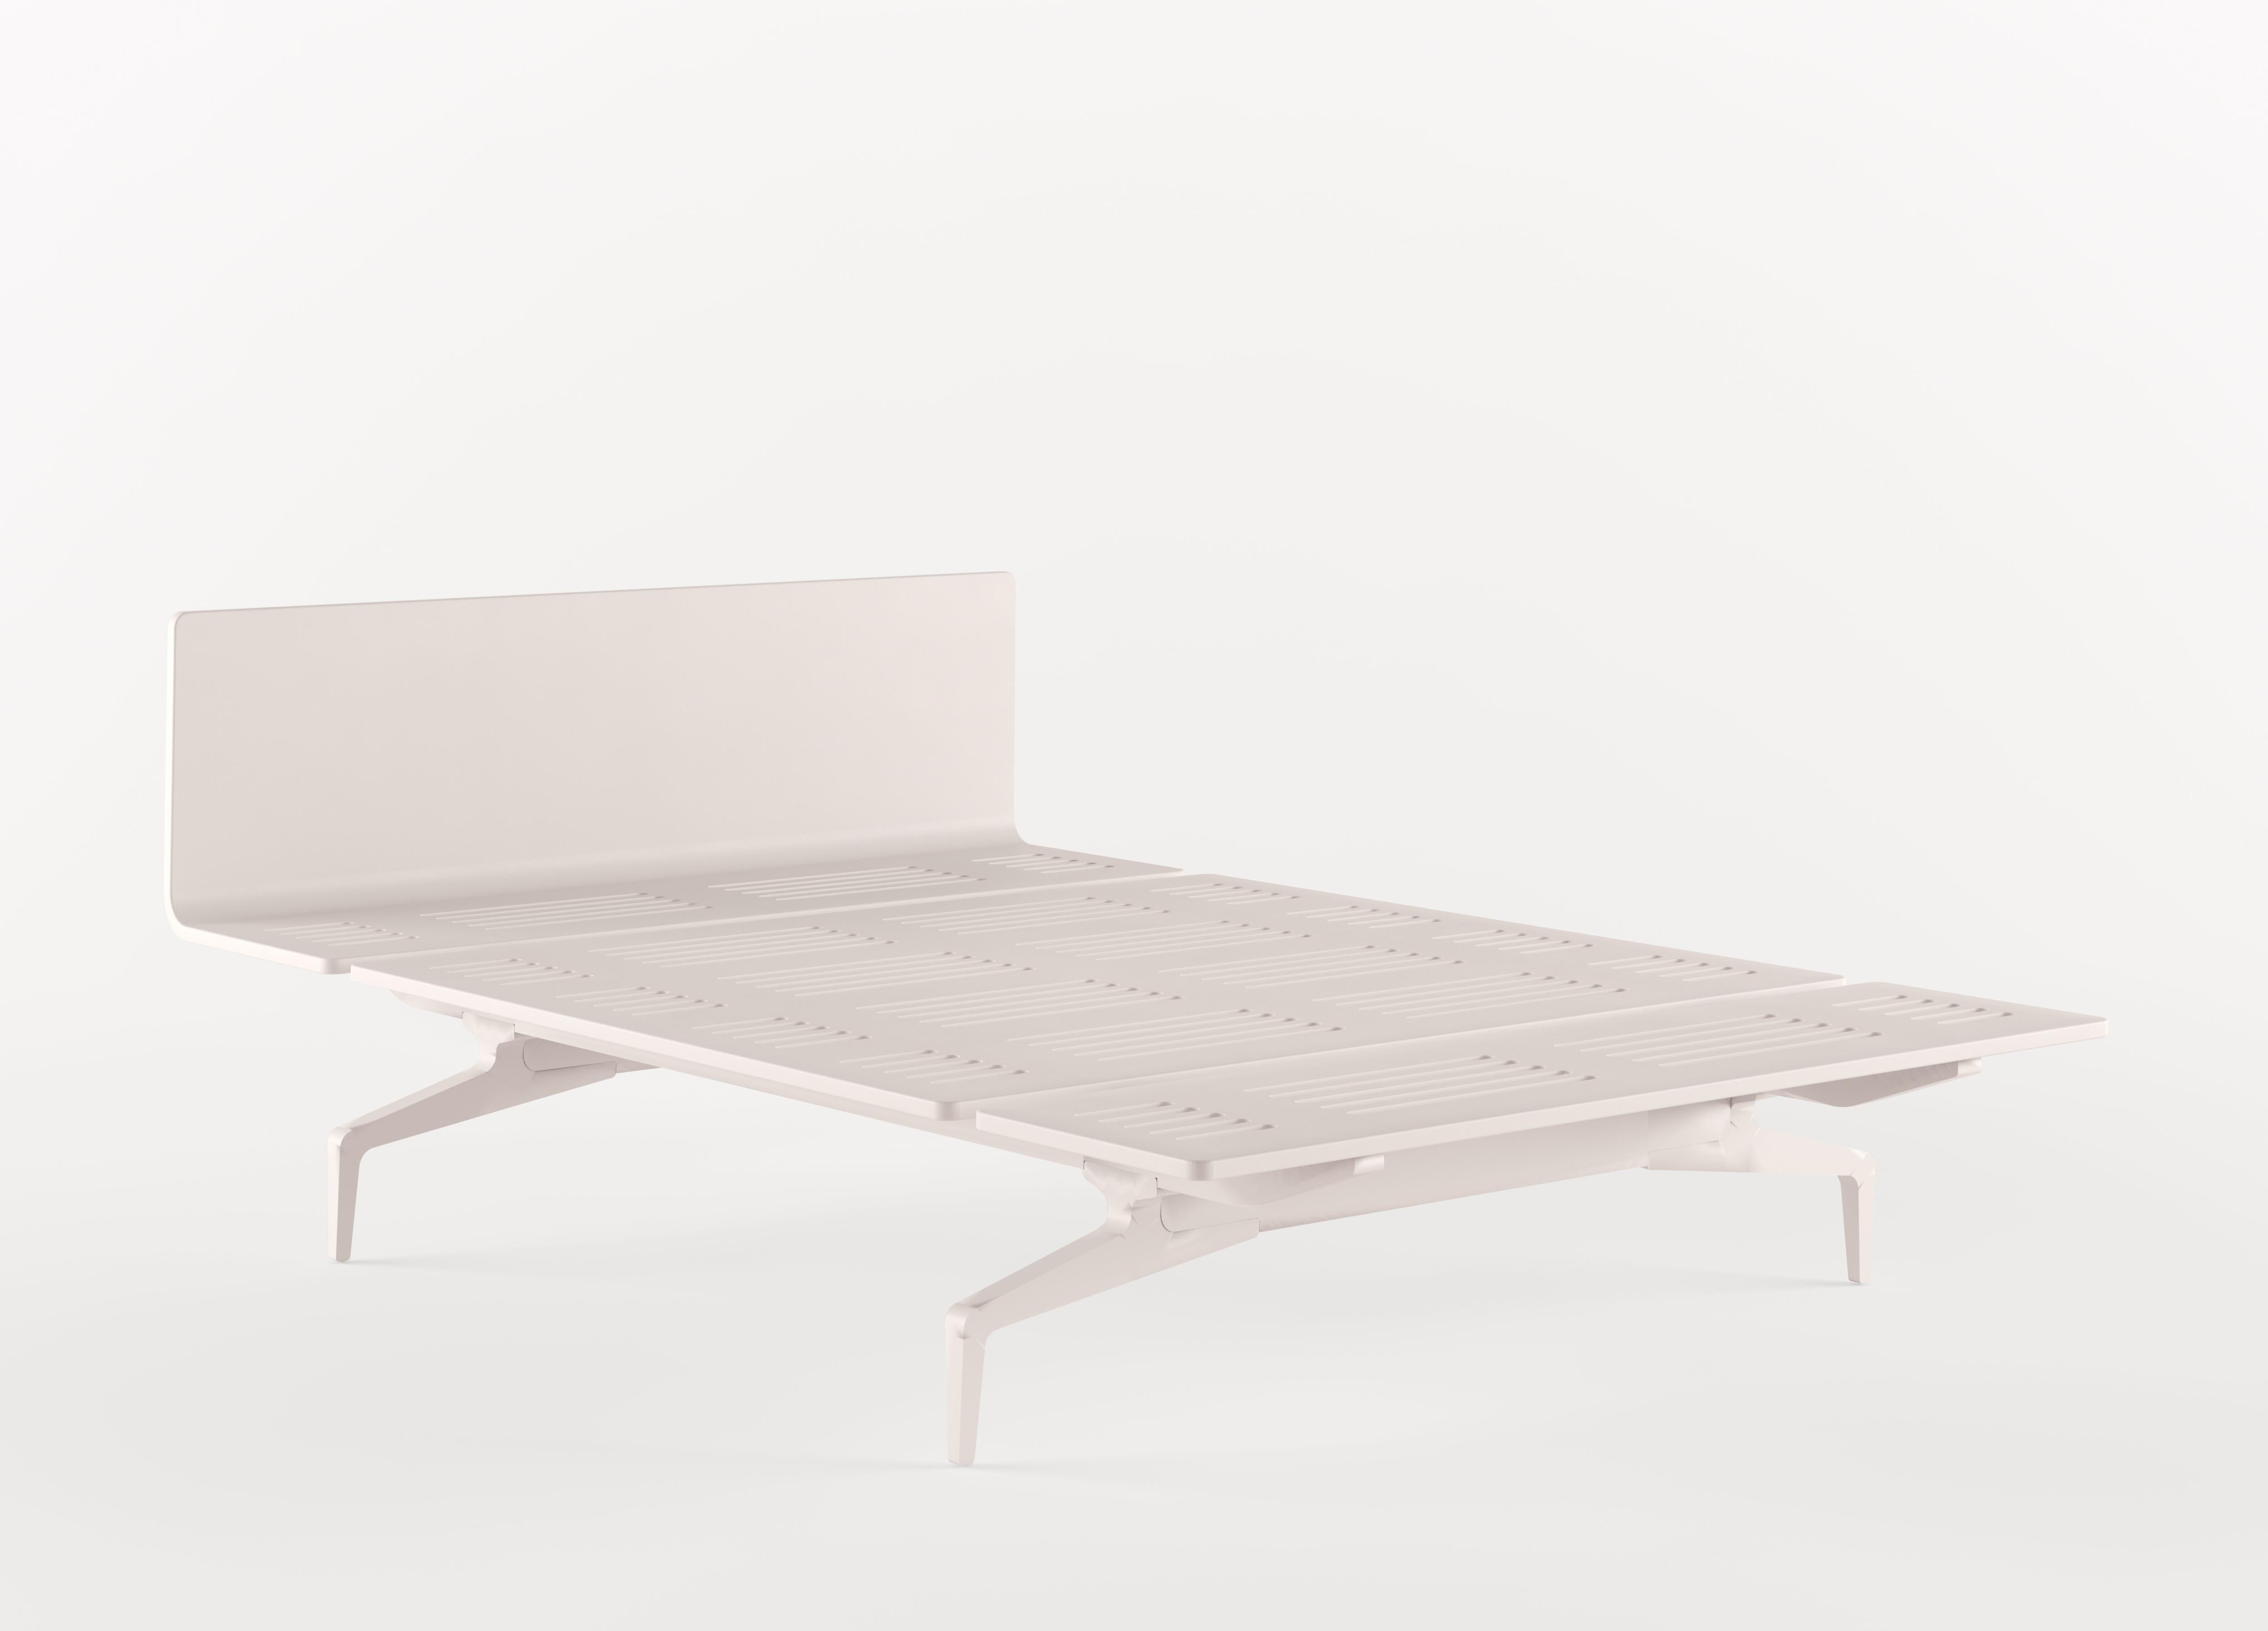 Alias Medium LL3 Legnoletto Bed in White Matt Lacquer Frame by Alfredo Häberli

Bed with headboard with medium edge and foot without edge matt lacquered; legs in polished or lacquered die-cast aluminium. Dimensions: - 90x206 cm (suggested mattress